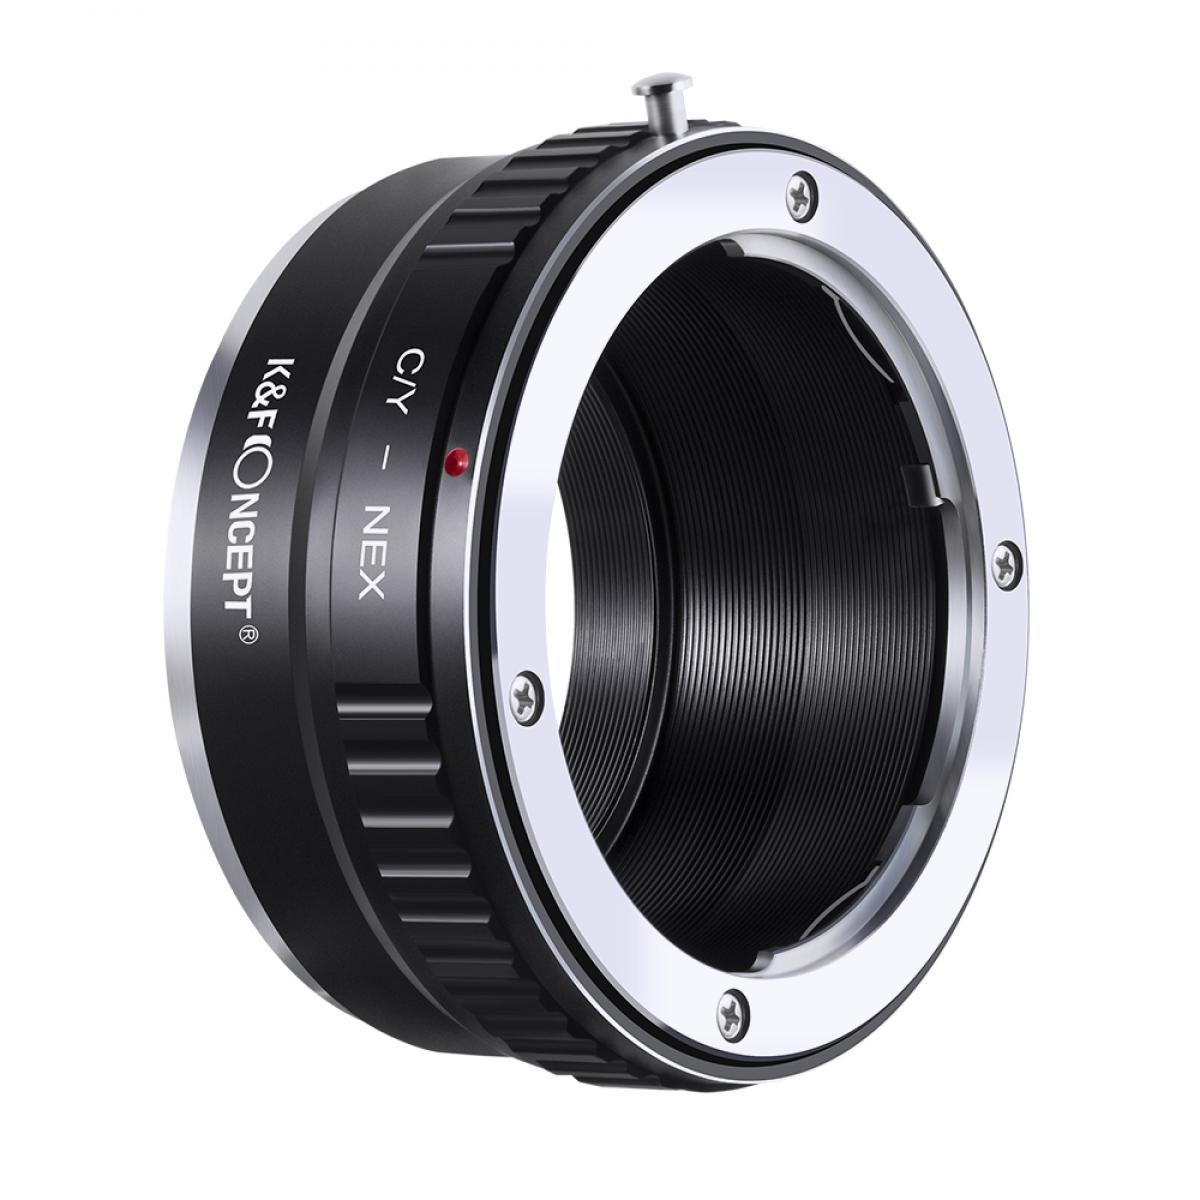 K&F Concept M14101 Contax Yashica Lenses to Sony E Lens Mount Adapter